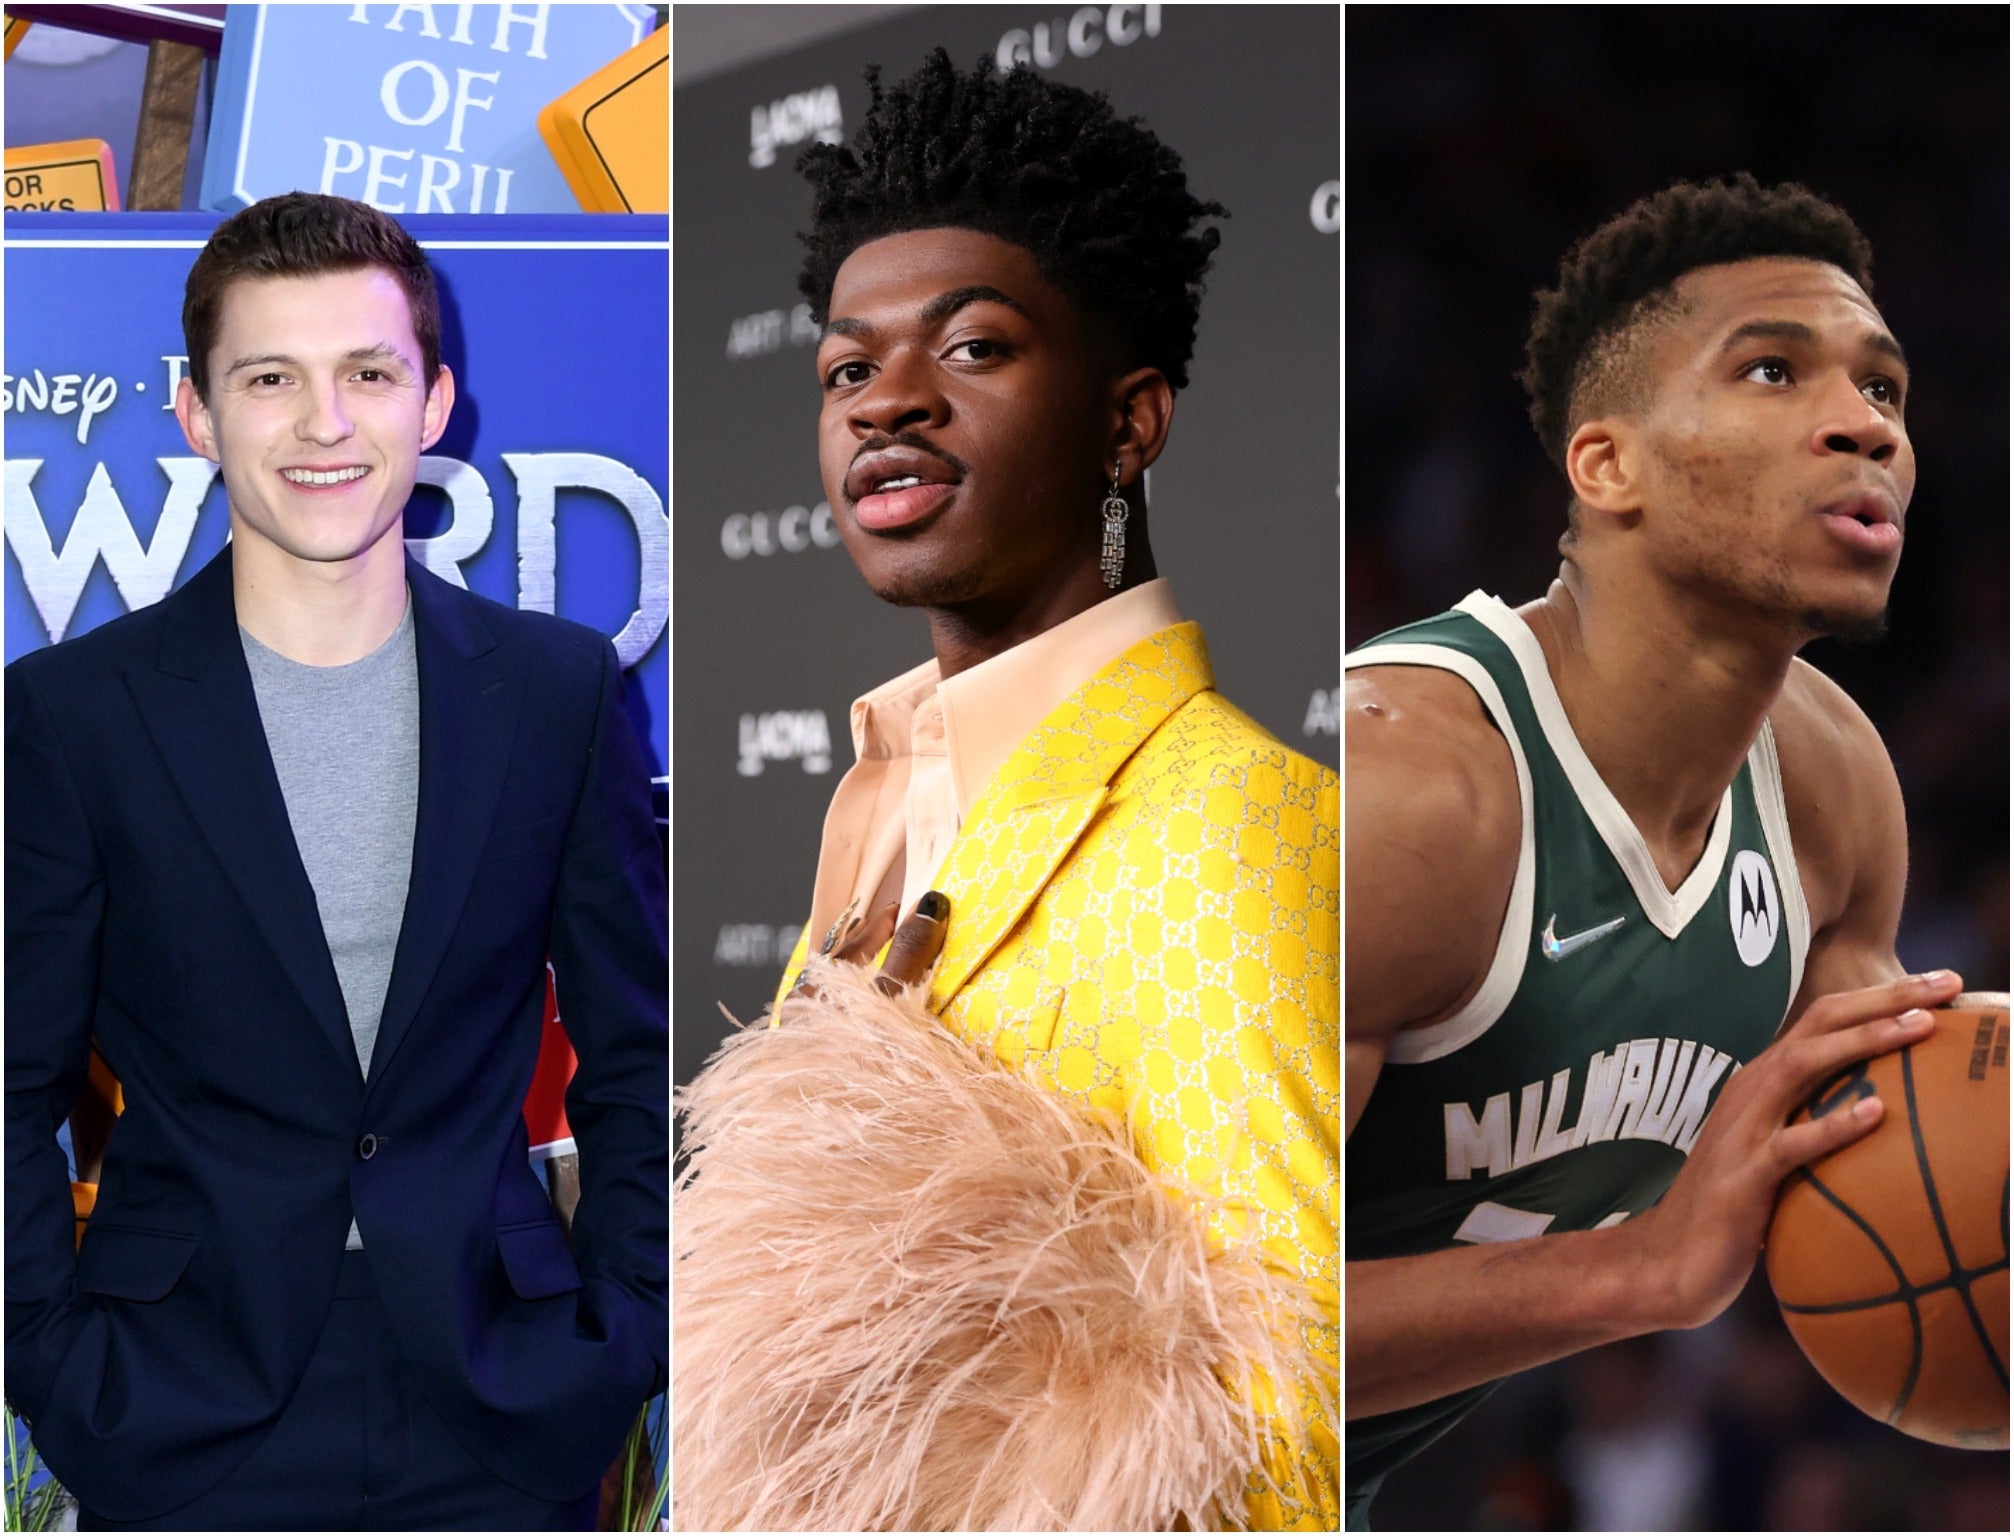 Lil Nas X joins Tom Holland and Giannis Antetokounmpo as GQ's Men of The Year